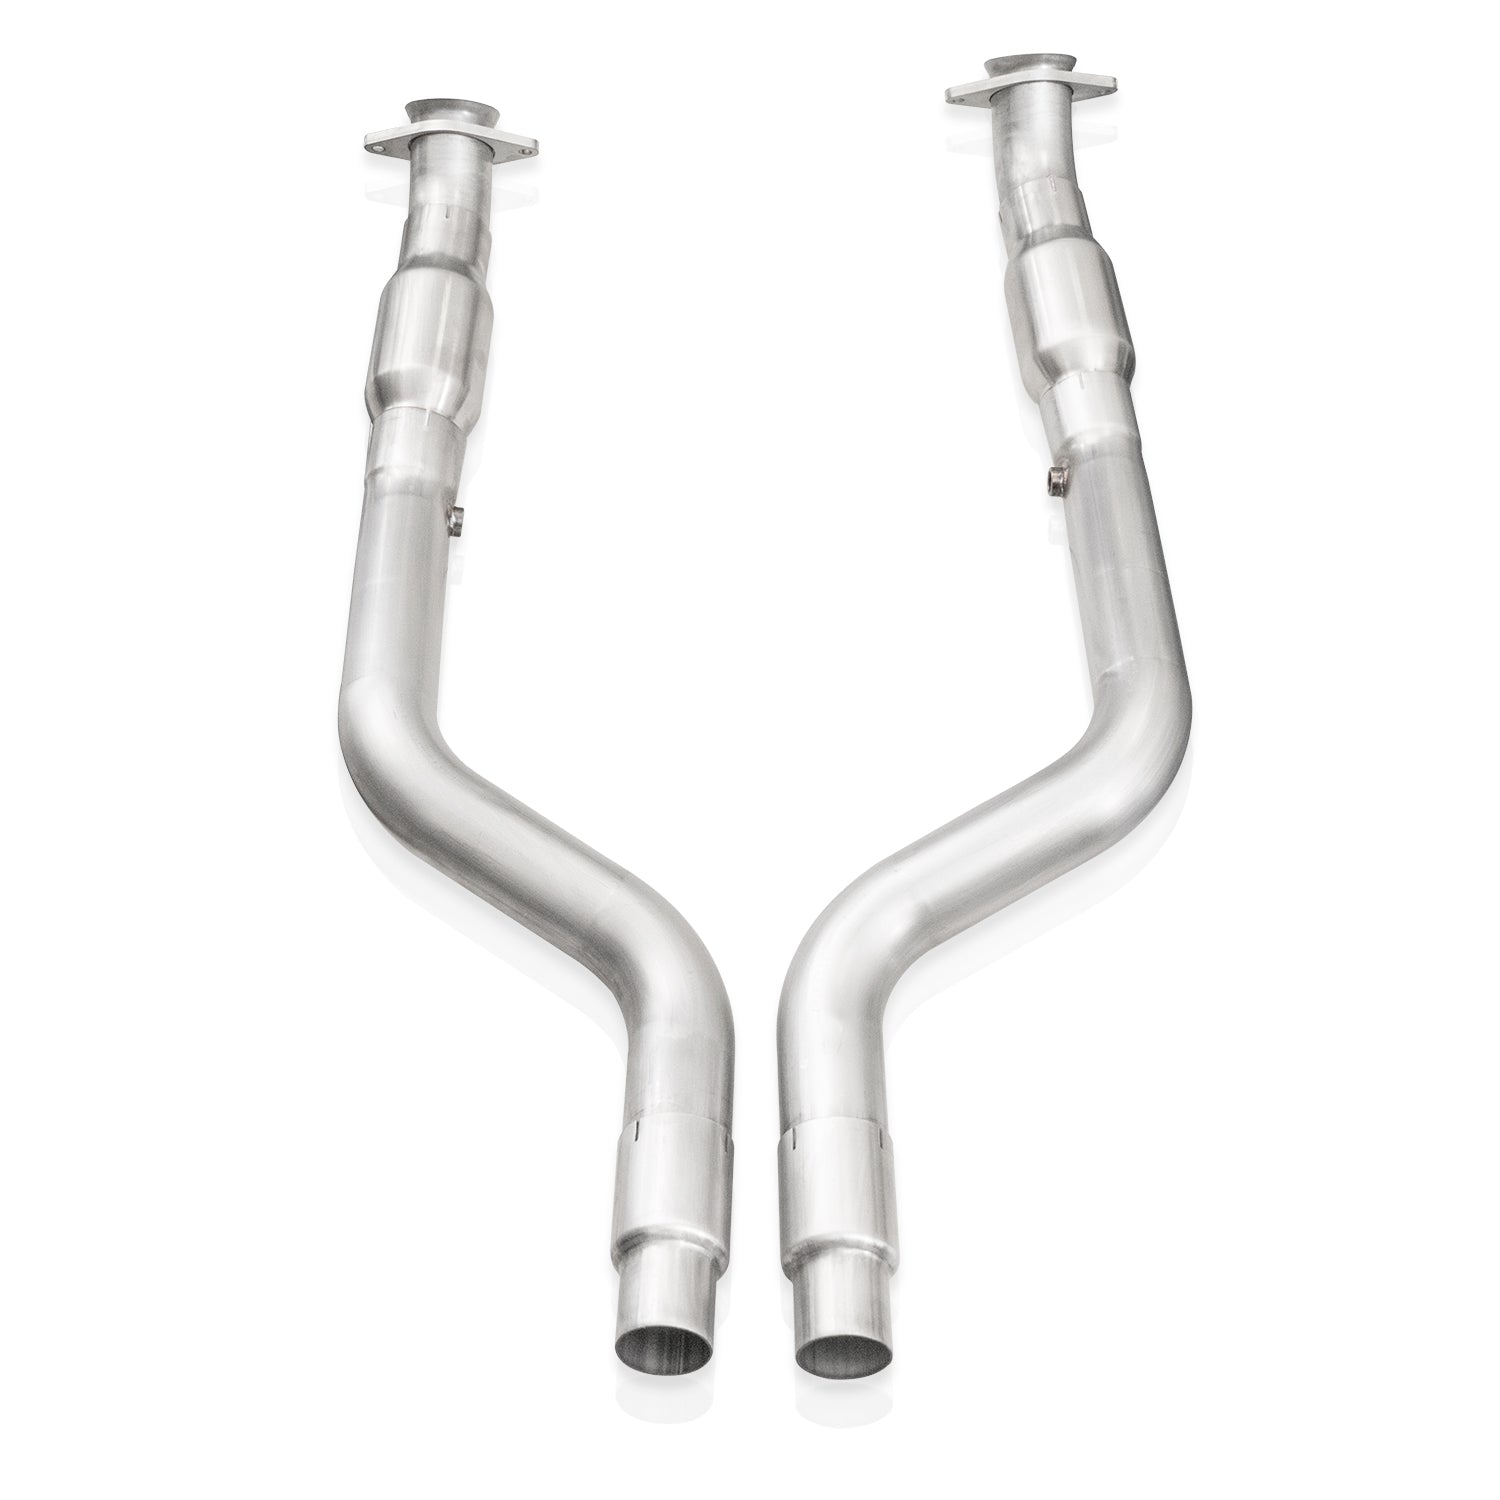 2015-21-challenger-charger-midpipe-kit-2